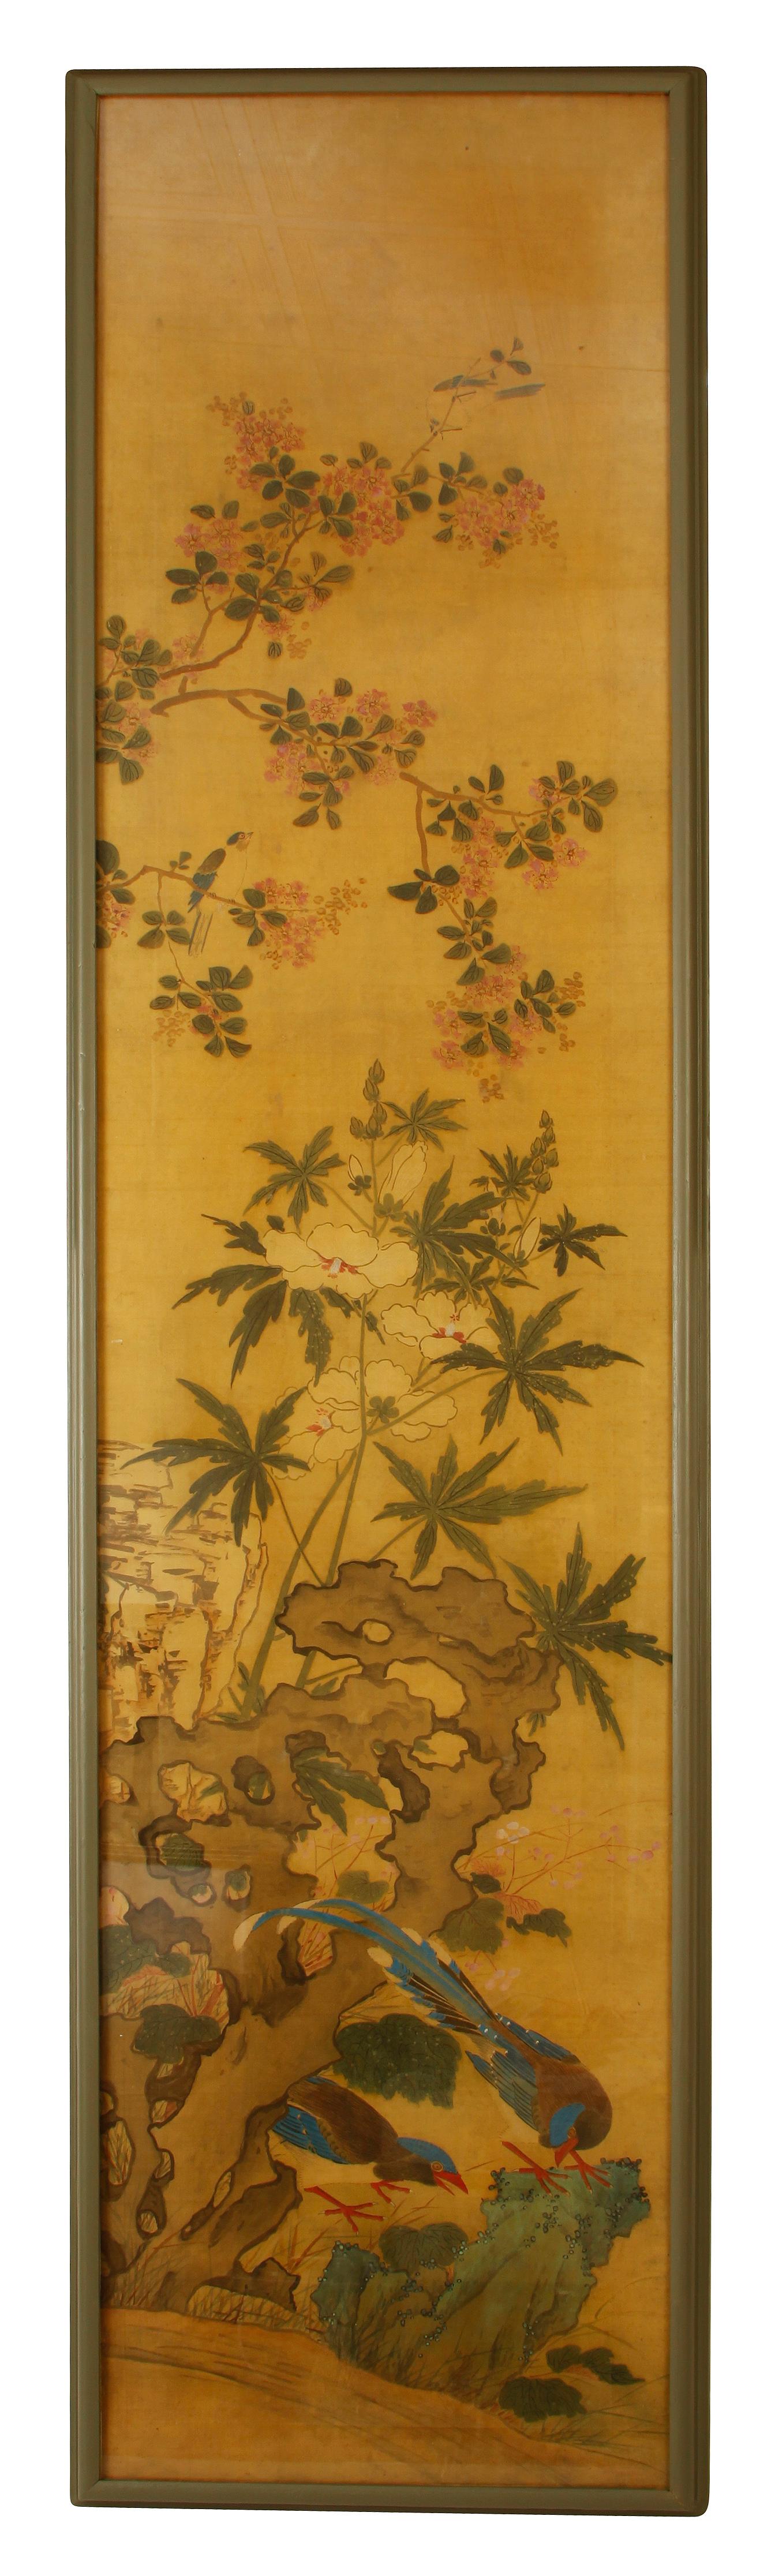 A pair of Chinese paintings on silk panels in frames, each panel a beautiful nature scene of flowers and woodland.